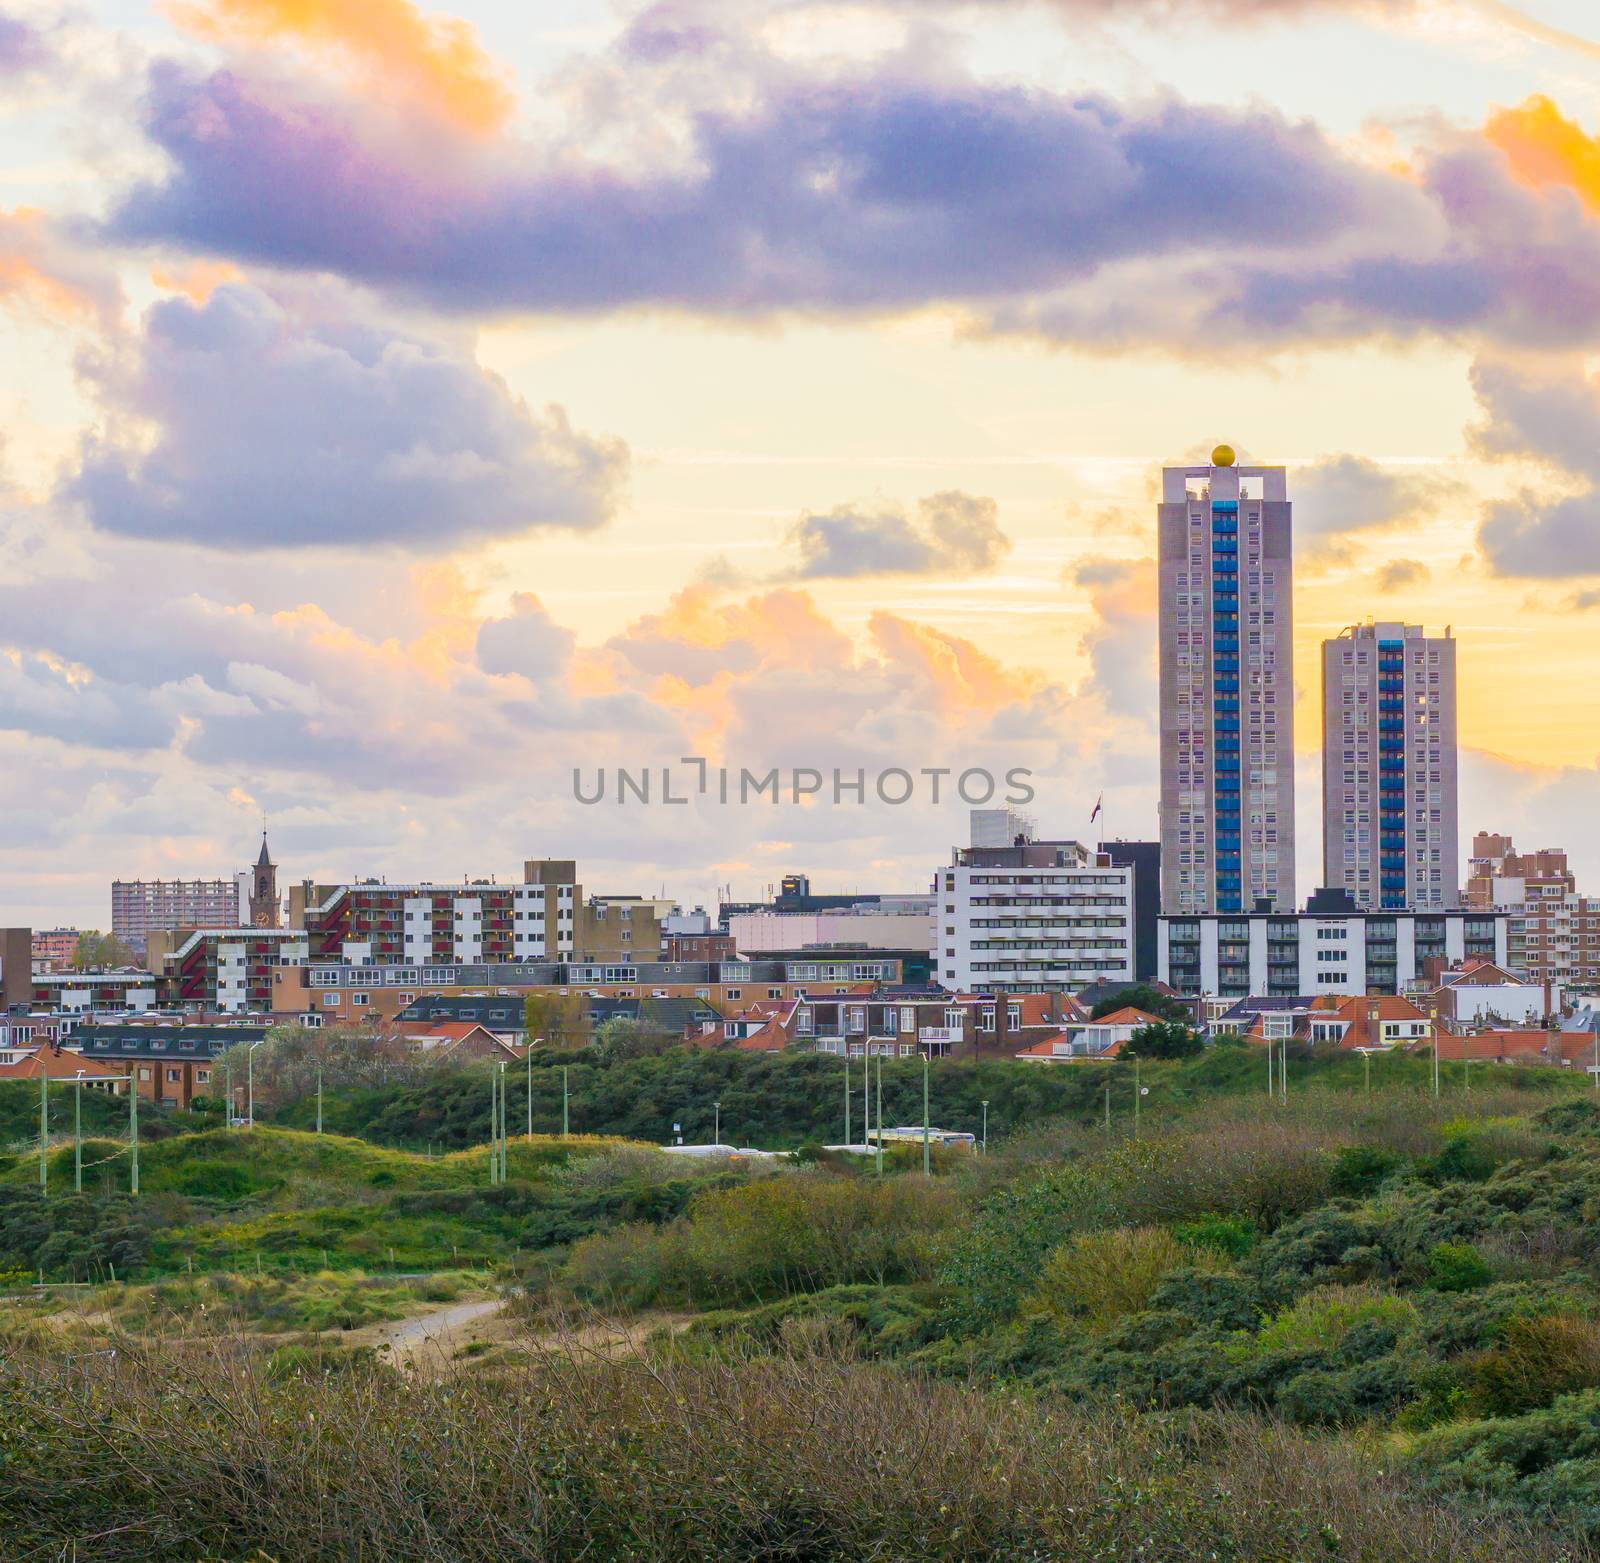 Popular and touristic location Scheveningen The netherlands a town near the beach at sunset view from the dunes on the buildings and skyscrapers